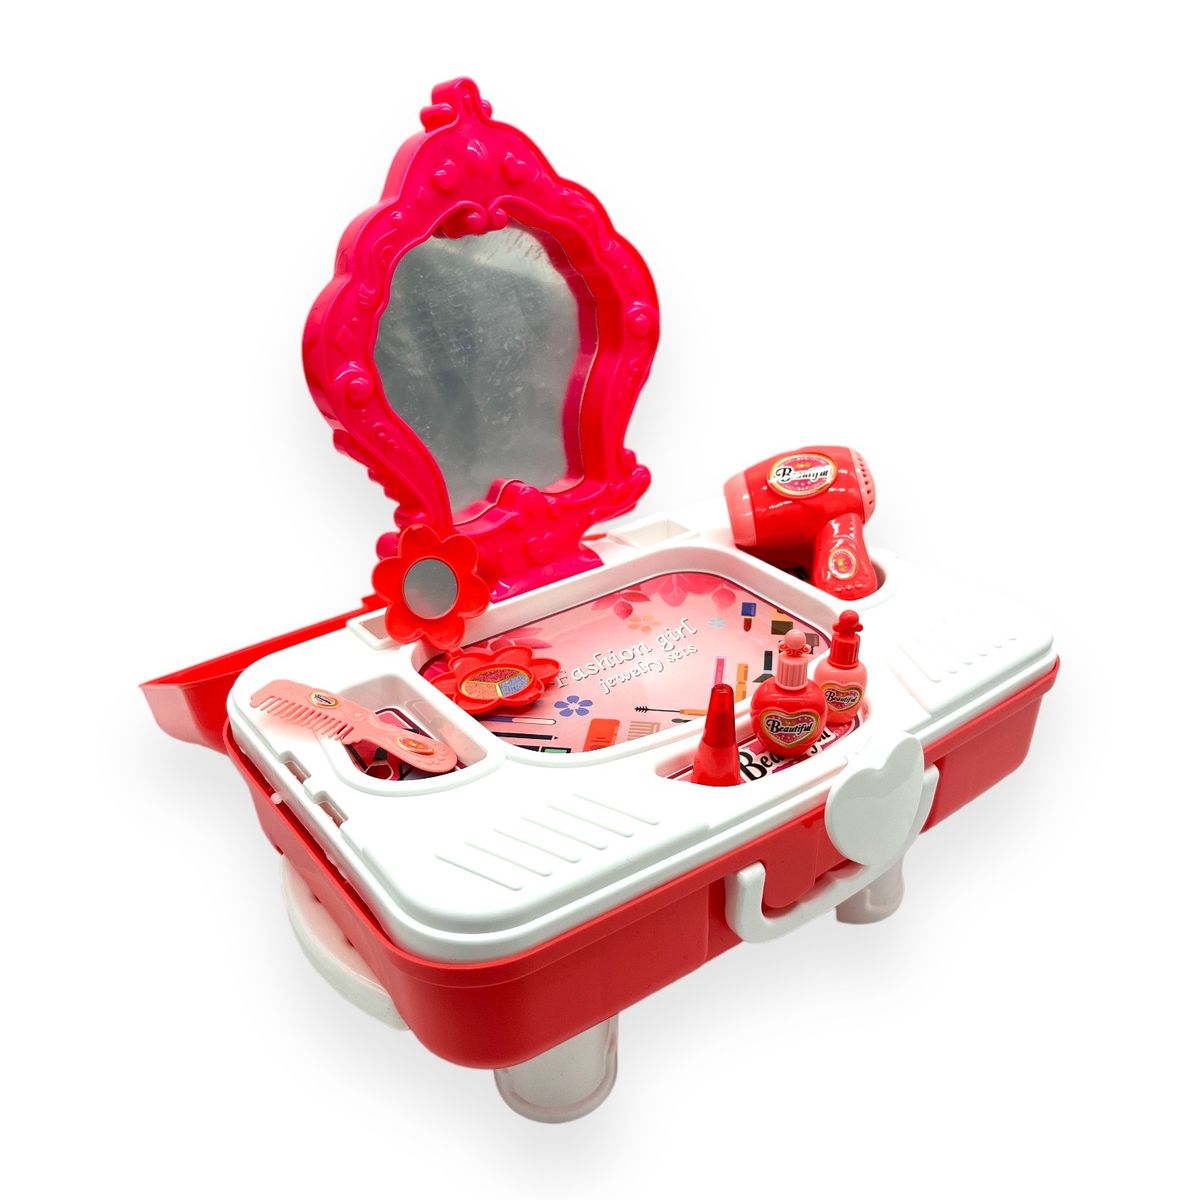 Fashion Girl 2-in-1 Makeup Play Set - Toys for Girls | Shop Today. Get ...